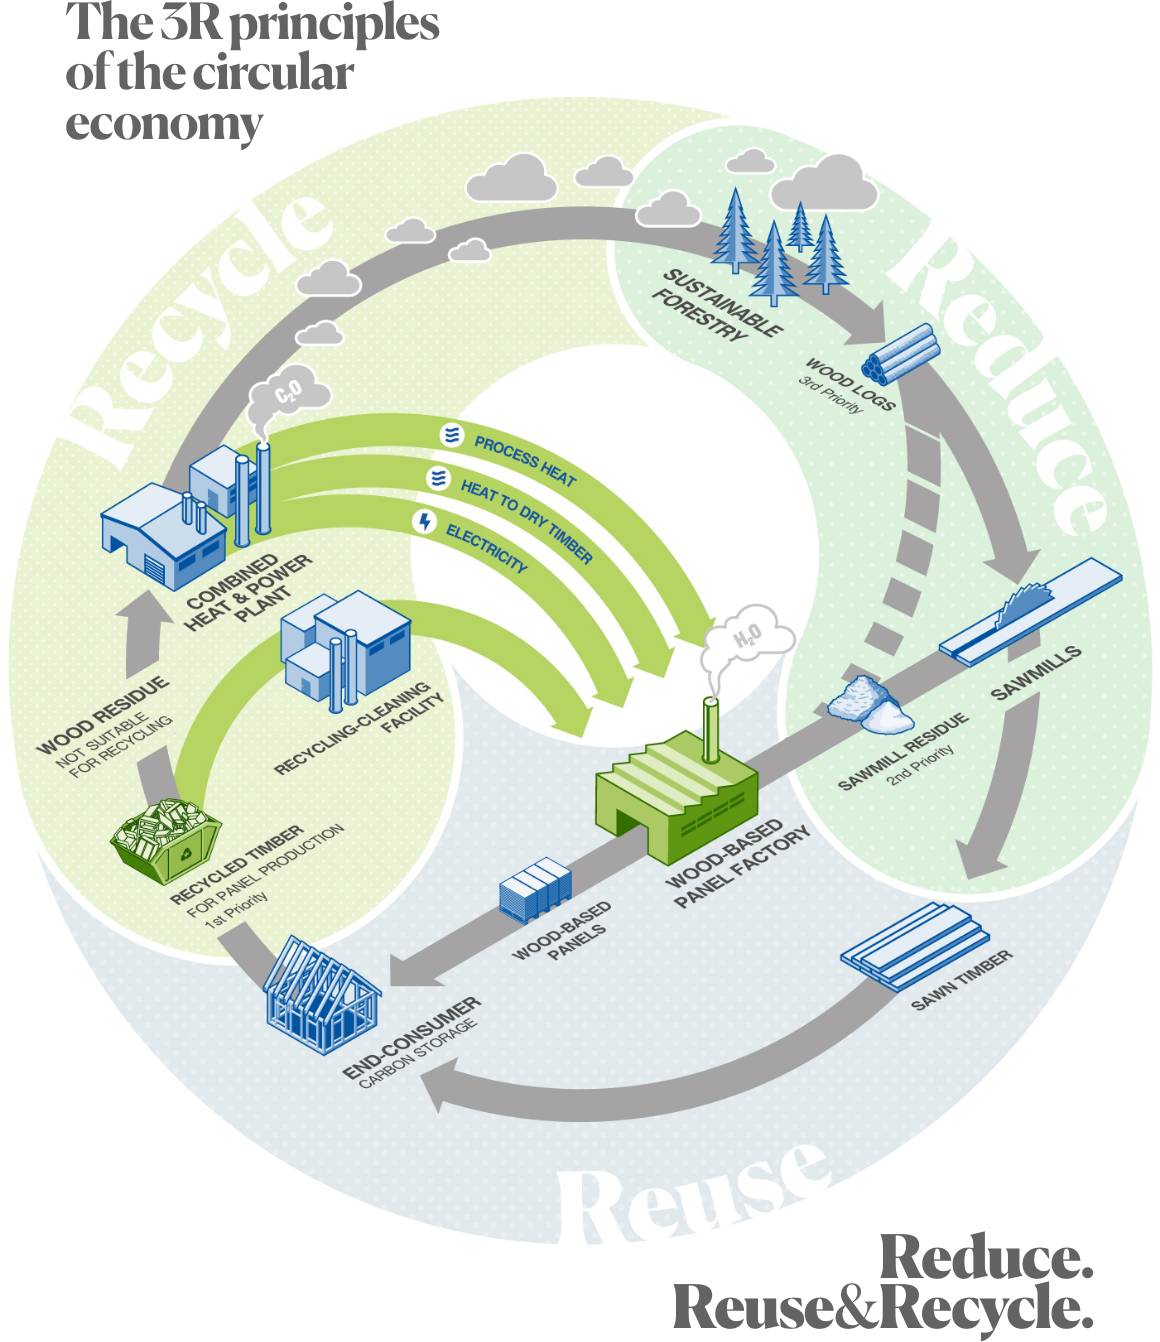 The 3R principles of the circular economy. Reduce&Reuse&Recycle